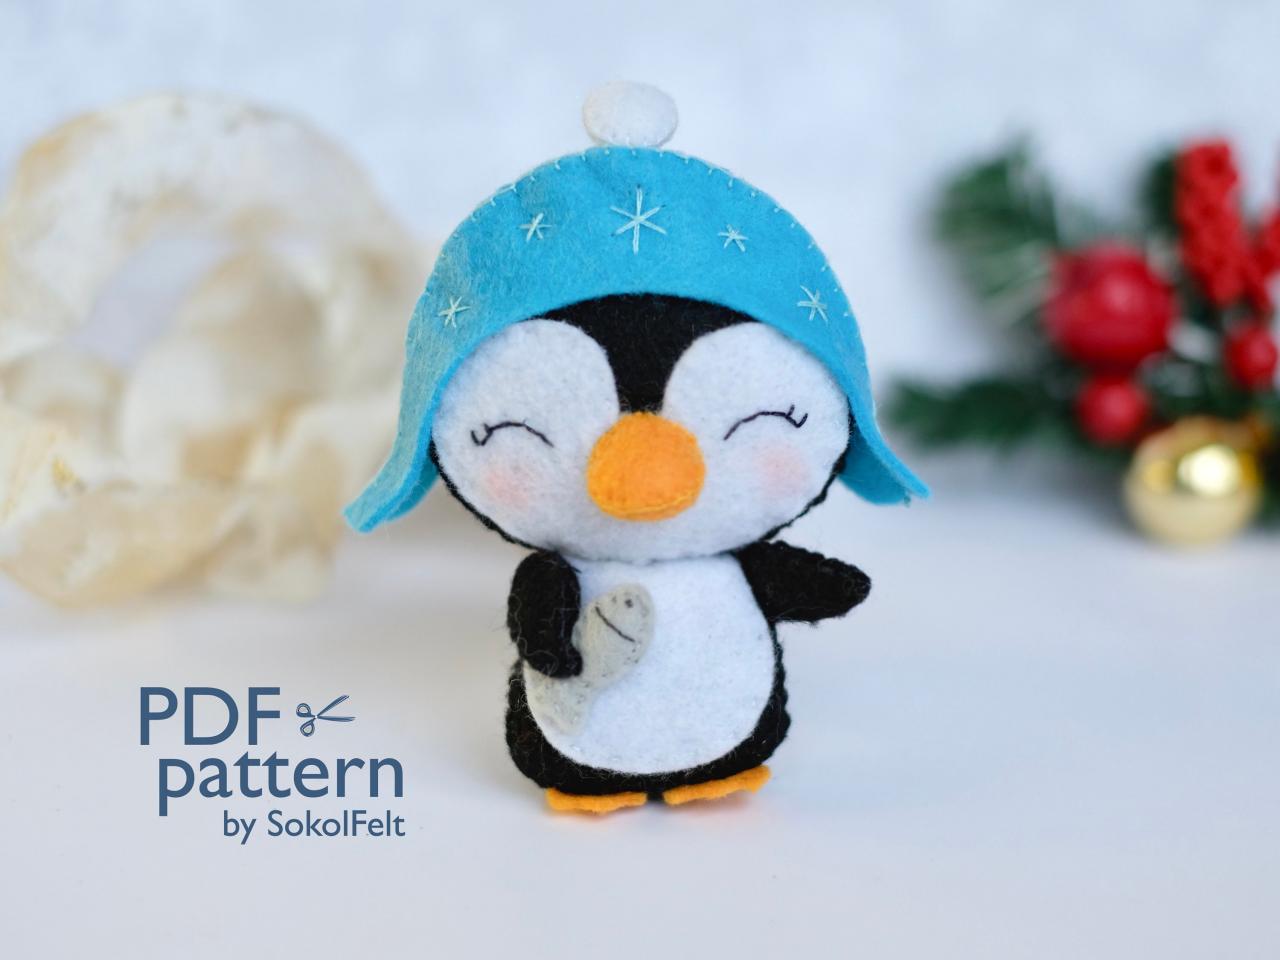 Little Felt penguin toy sewing PDF pattern, Christmas tree ornament, felt toy pattern for baby crib mobile, kids craft tutorial